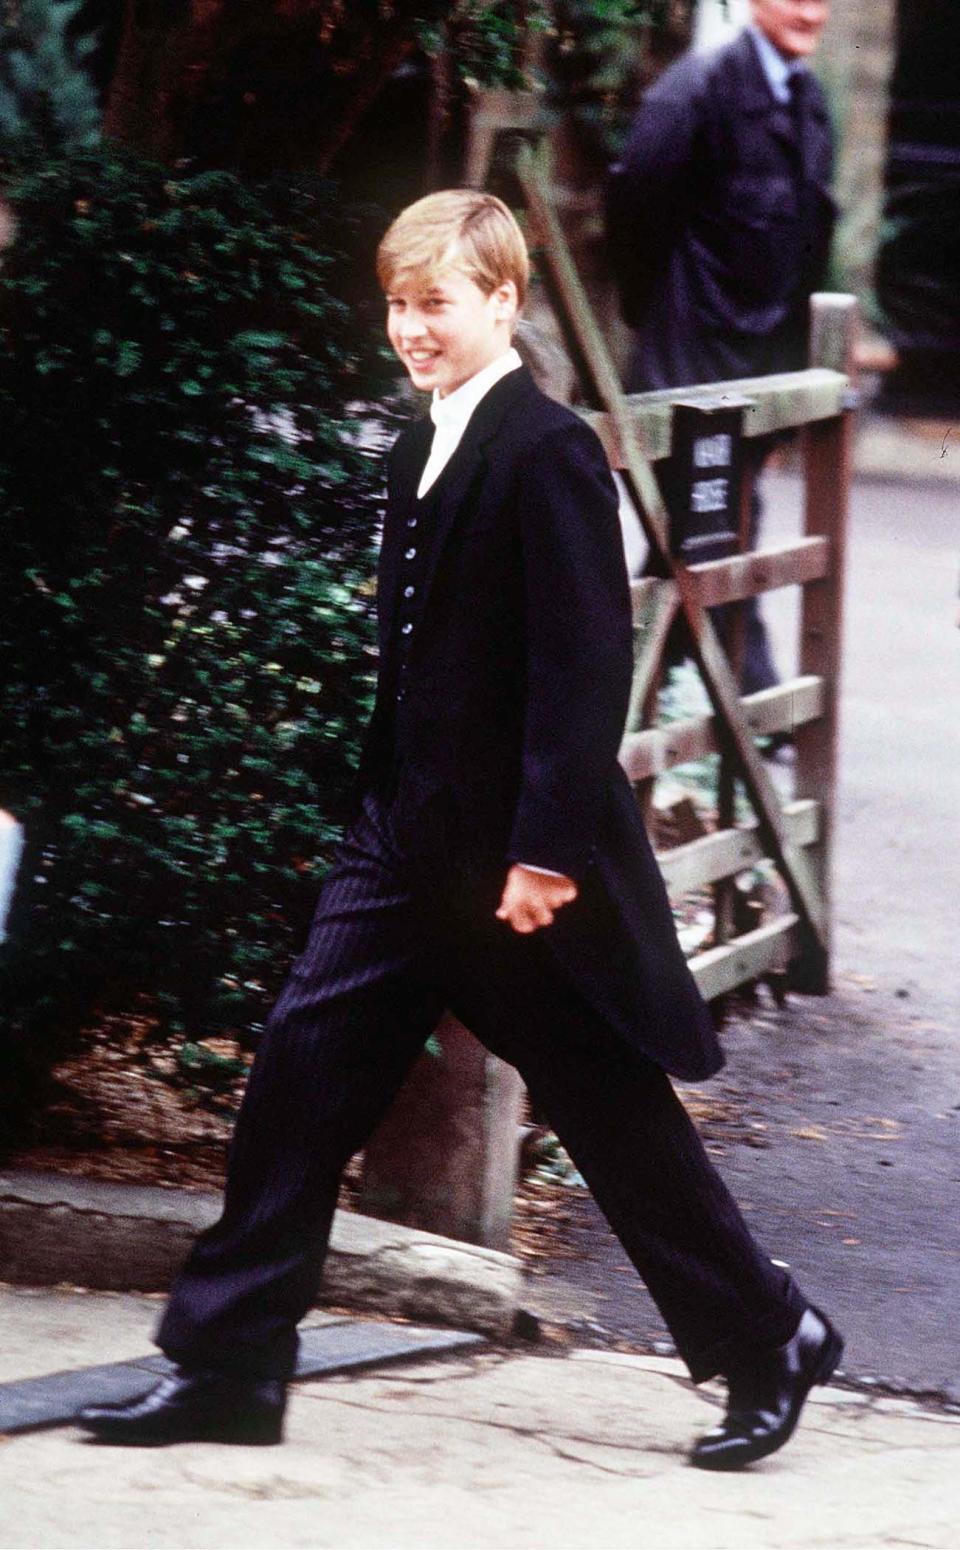 Prince William on his first day at Eton in September 1995. [Photo: PA]